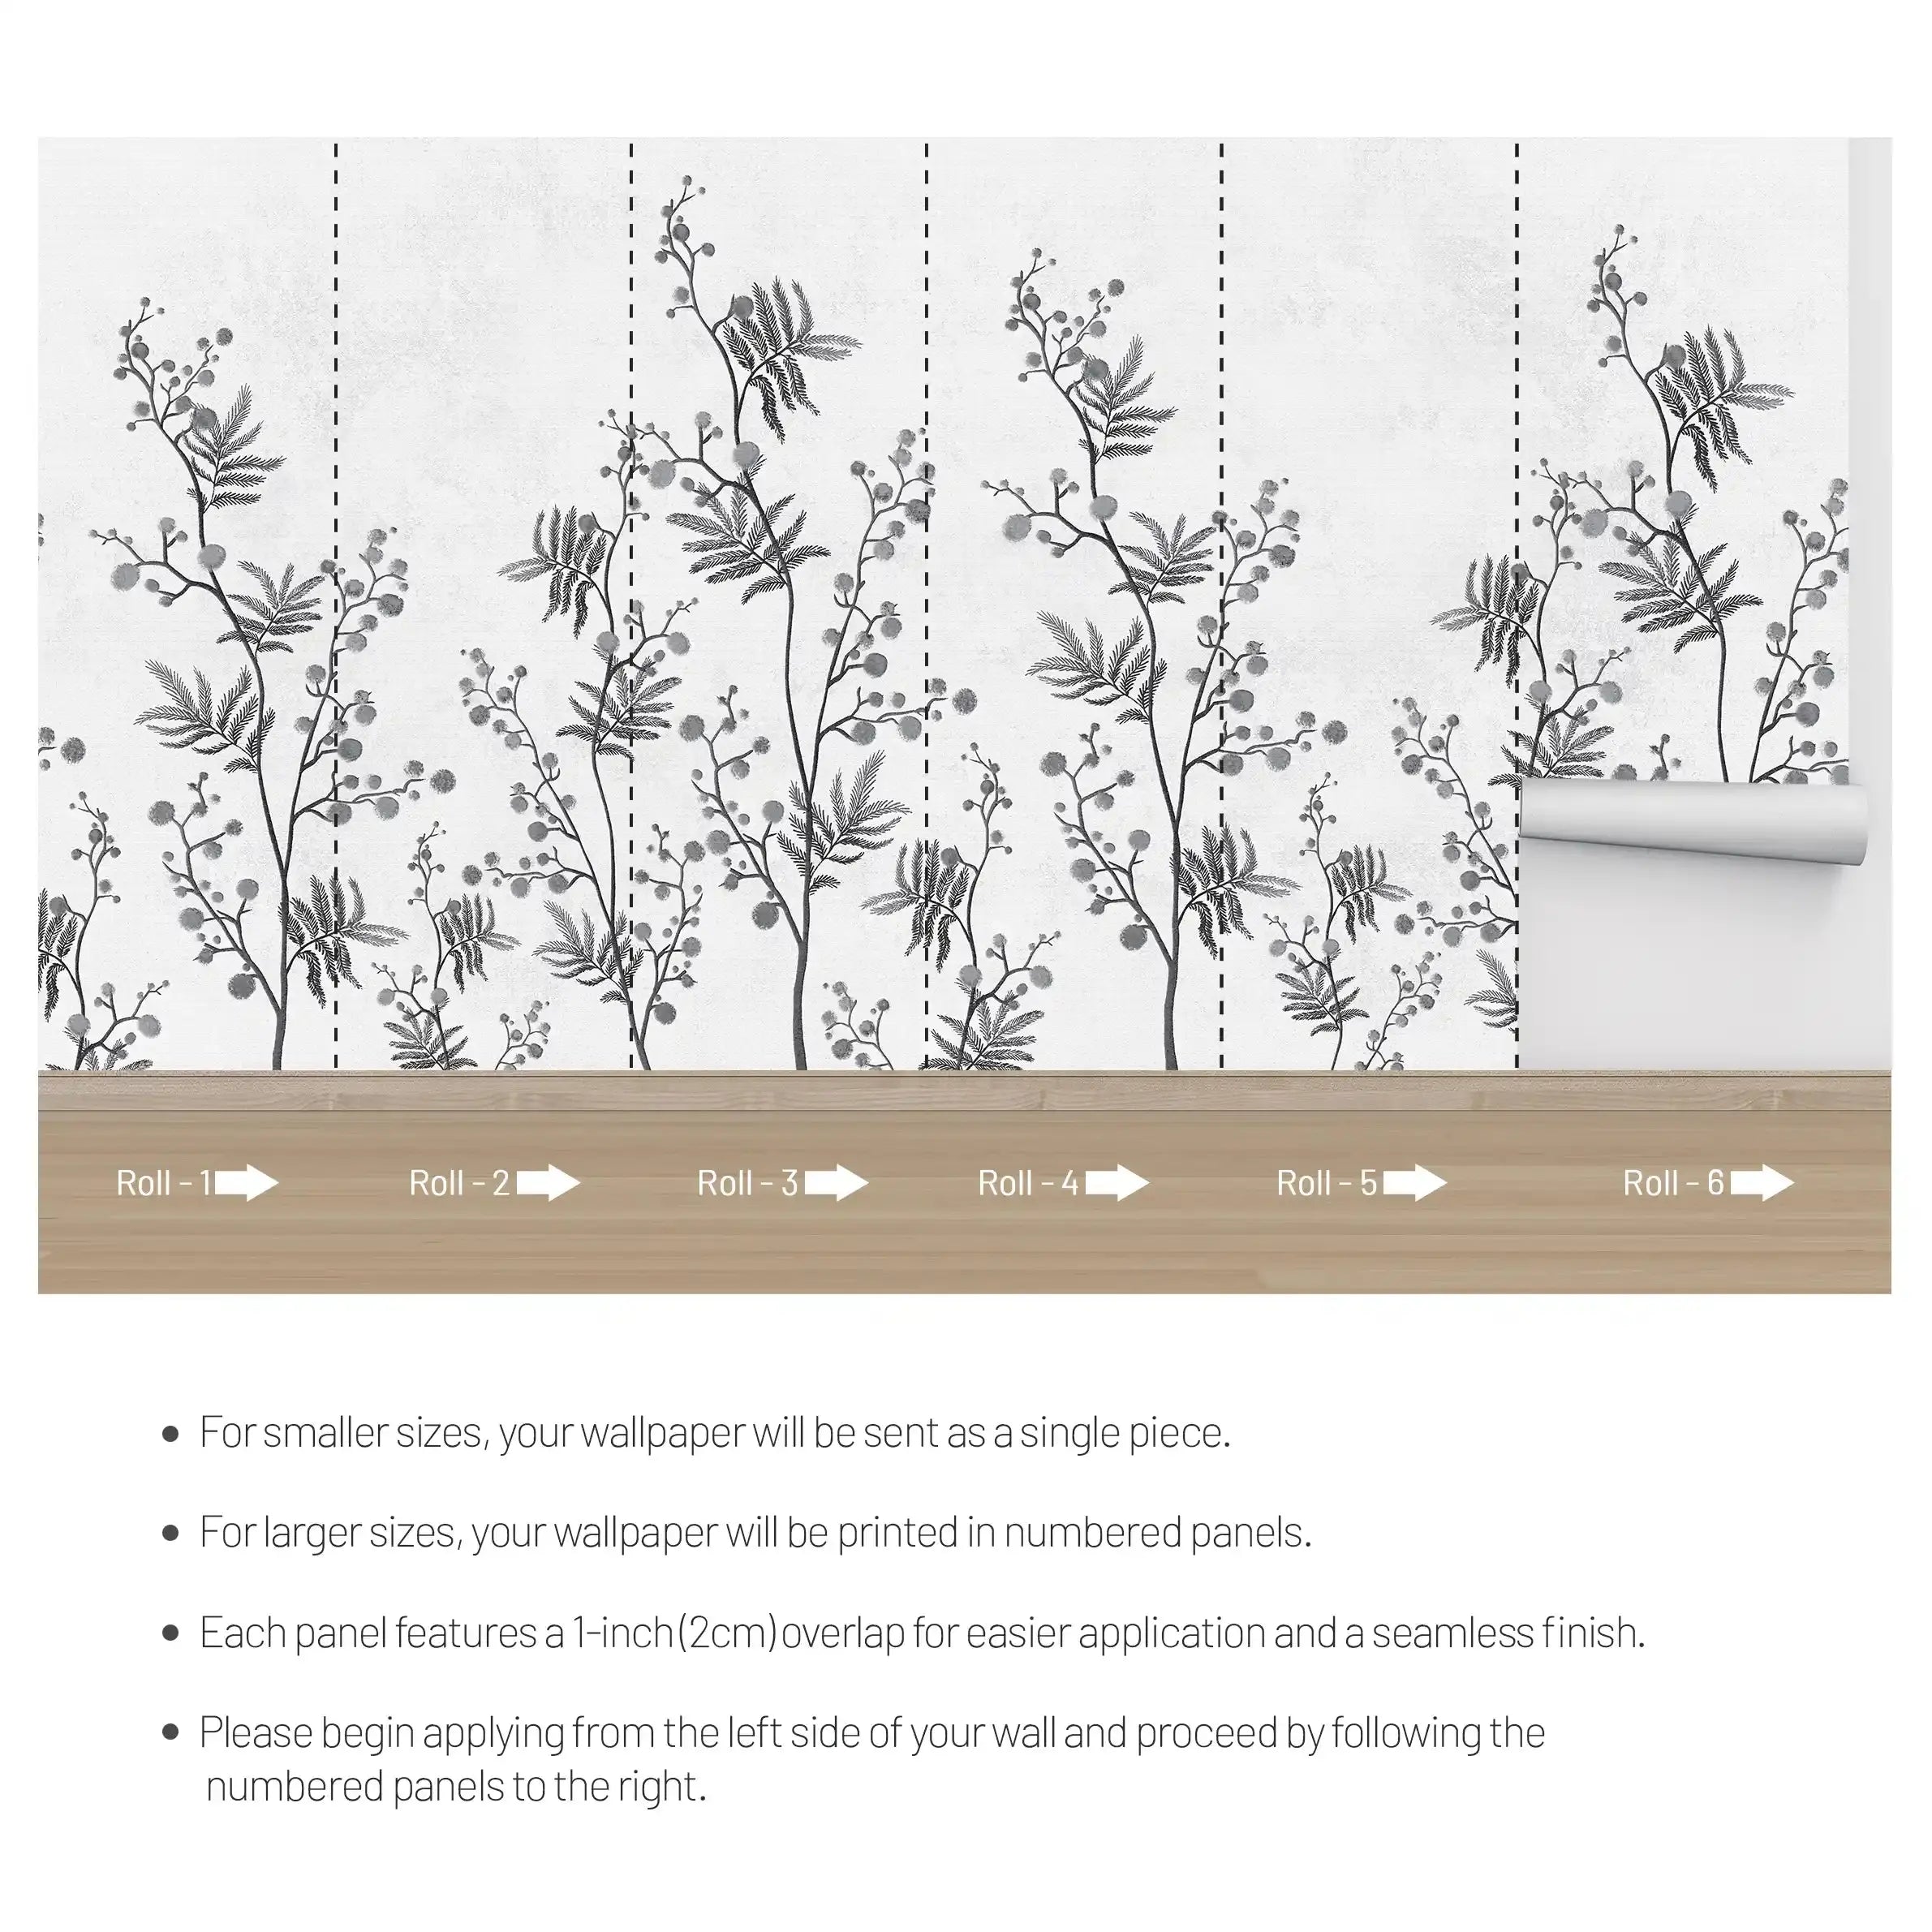 3016-E / Temporary Wallpaper: Floral Wall Mural with Easy Peel Off Design, Ideal for Accent Walls and Shelf Drawers - Artevella